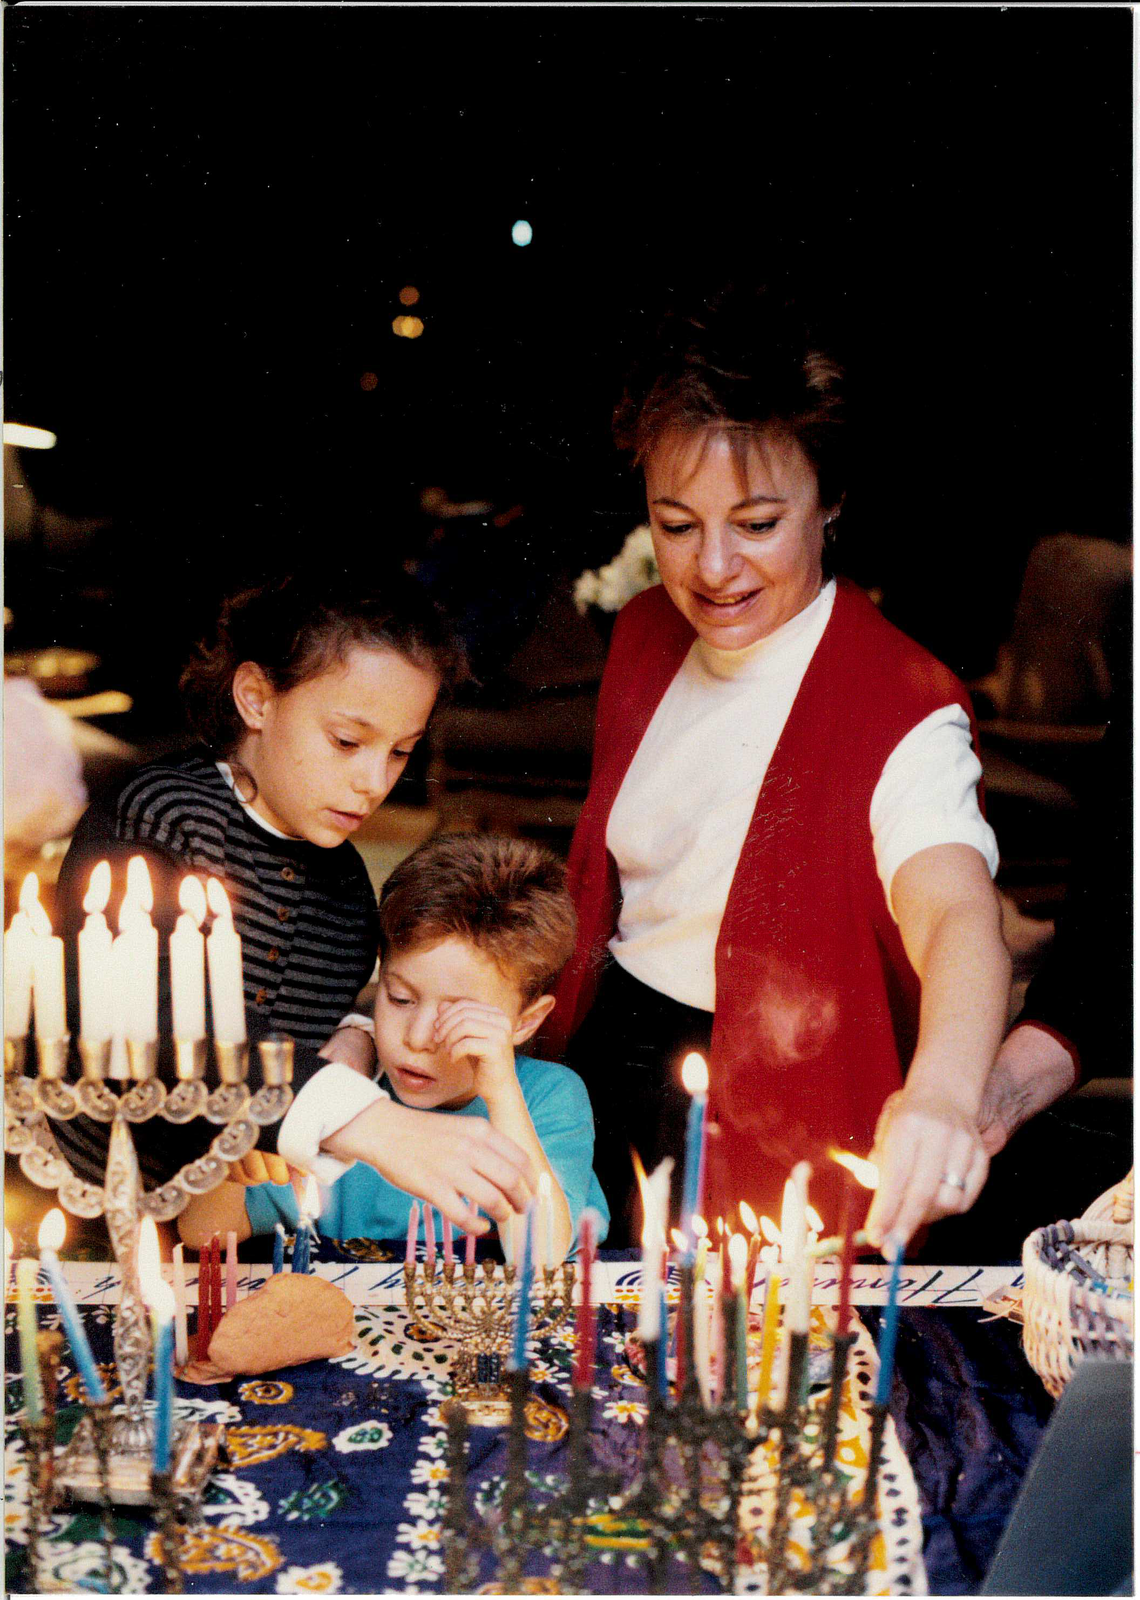 Michele and two of her three children, Mimi and Jack [Leslie not pictured], during Chanukah.